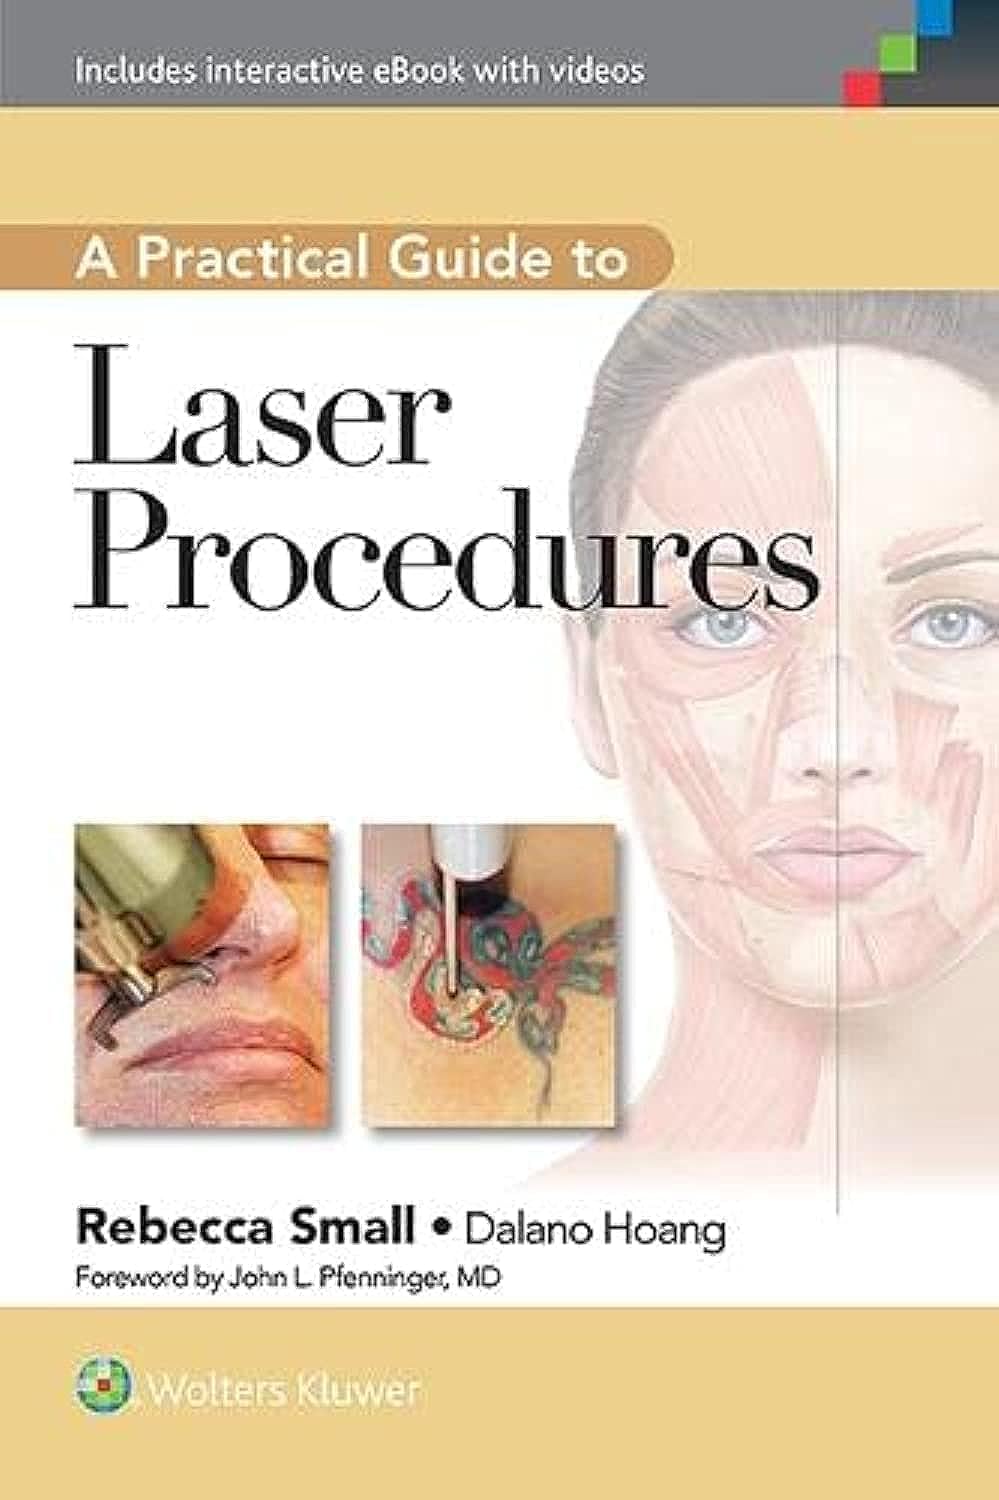 A Practical Guide to Laser Procedures  by  Rebecca Small MD FAAFP